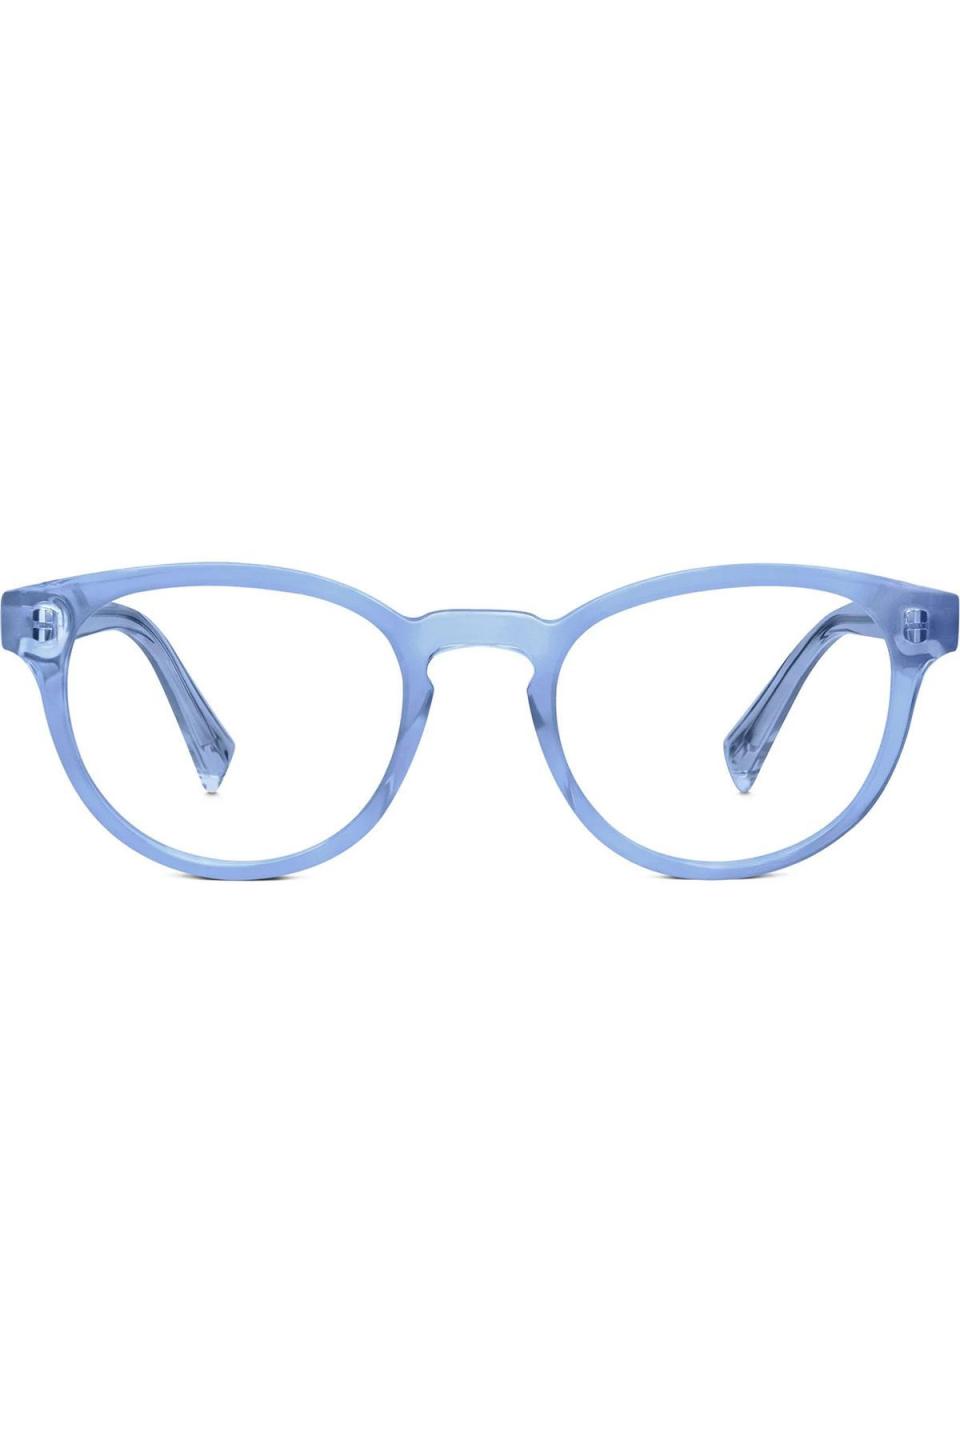 13) Warby Parker Percey